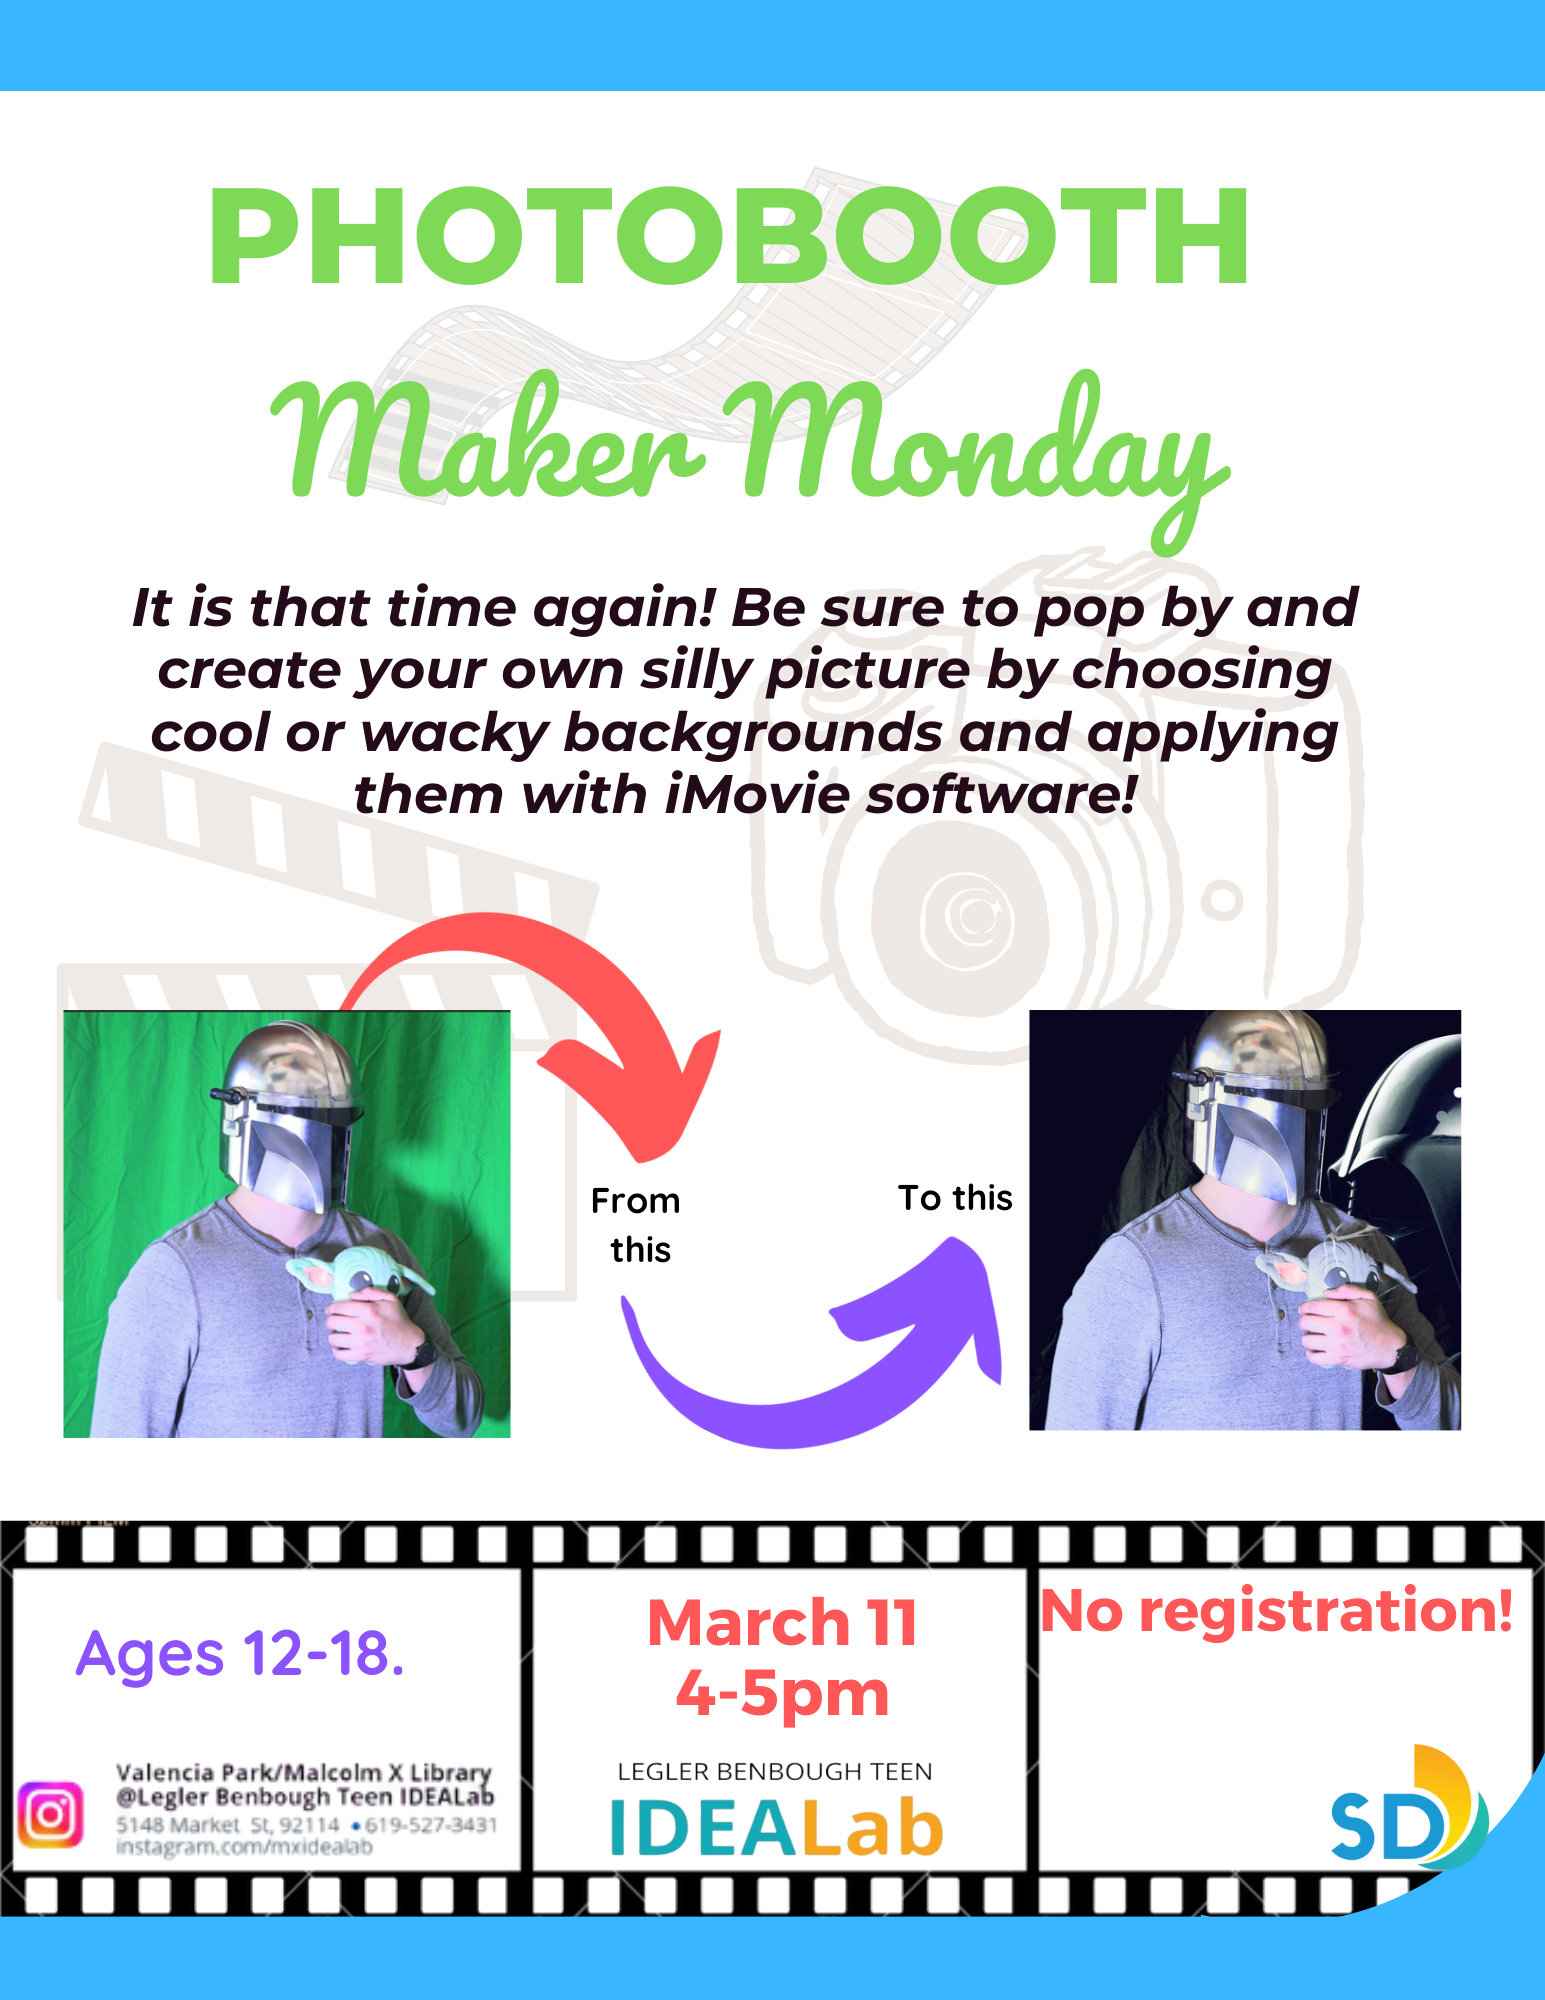 It is that time again! Be sure to pop by and  create your own silly picture by choosing cool or wacky backgrounds and applying them with iMovie software!